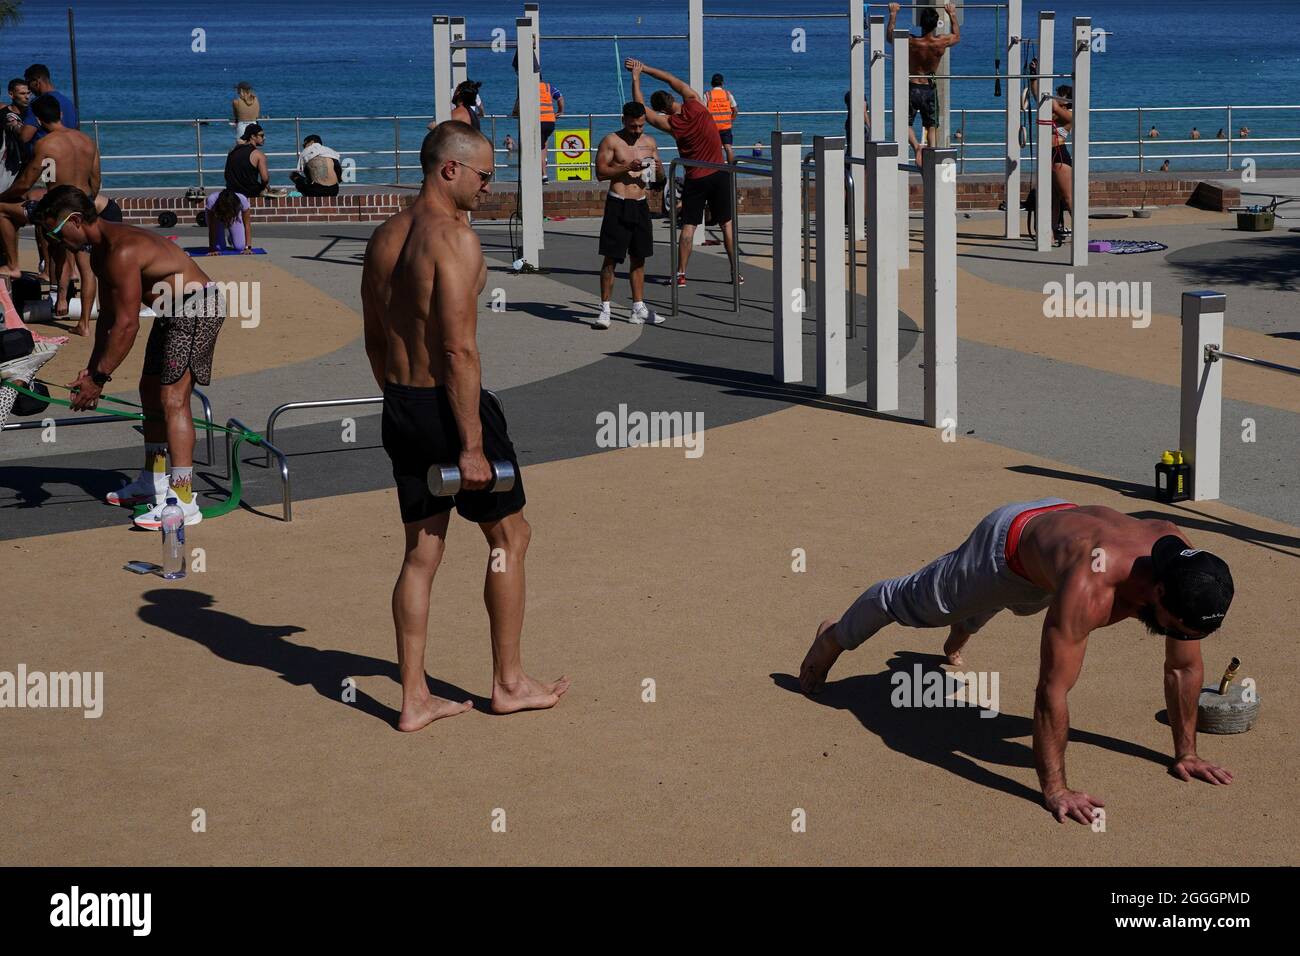 People exercise in the outdoor gym area at Bondi Beach during a lockdown to  curb the